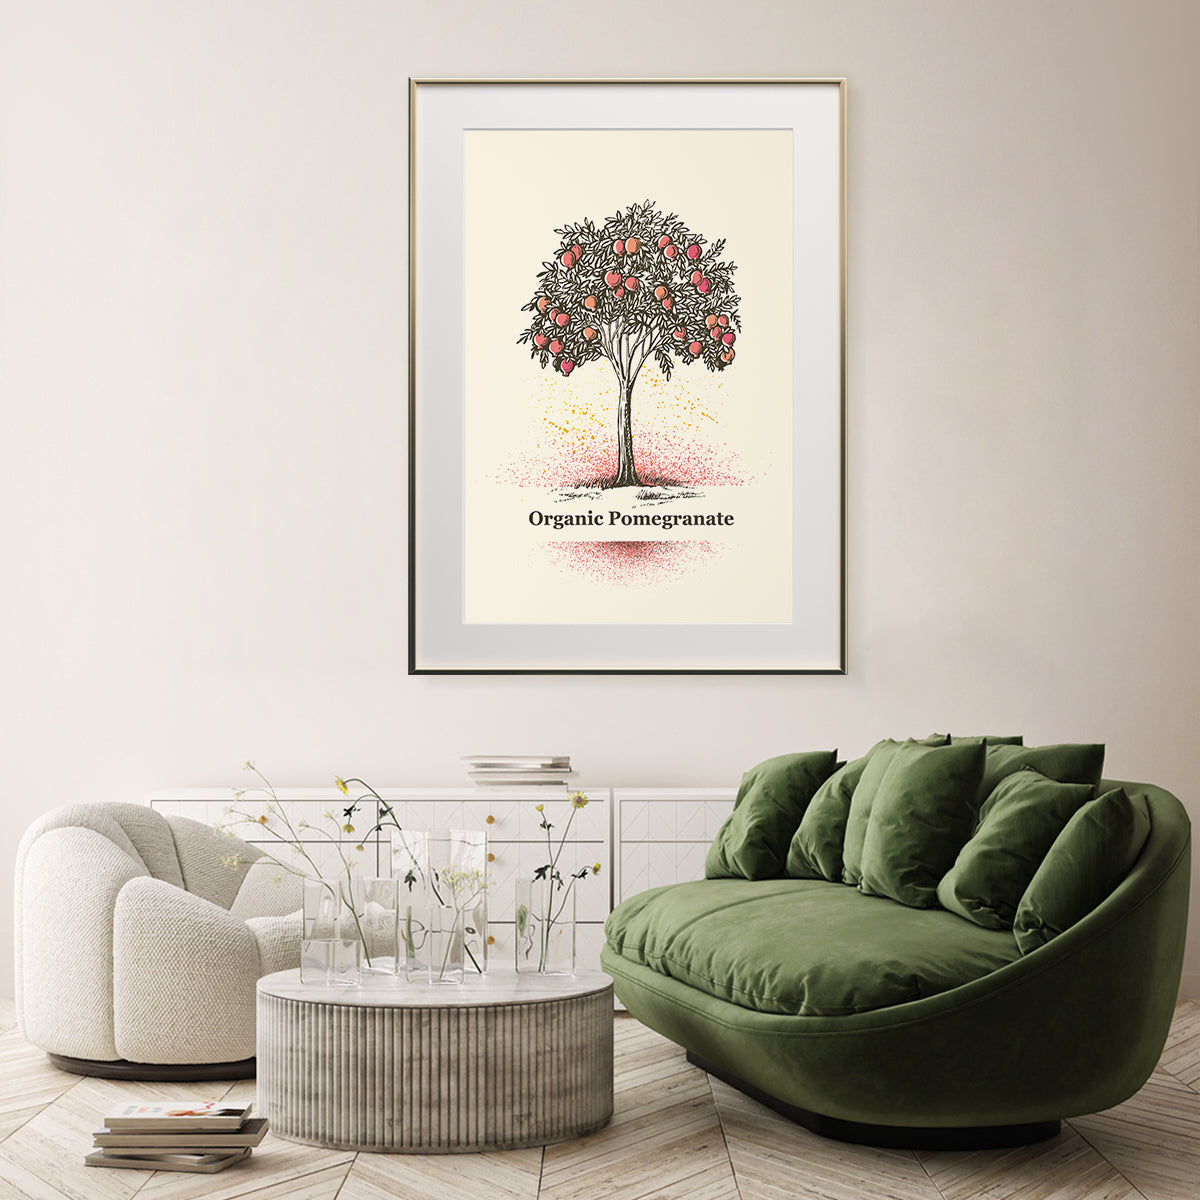 Pomegranate Tree Vintage Posters Decor For Room-Vertical Posters NOT FRAMED-CetArt-8″x10″ inches-CetArt